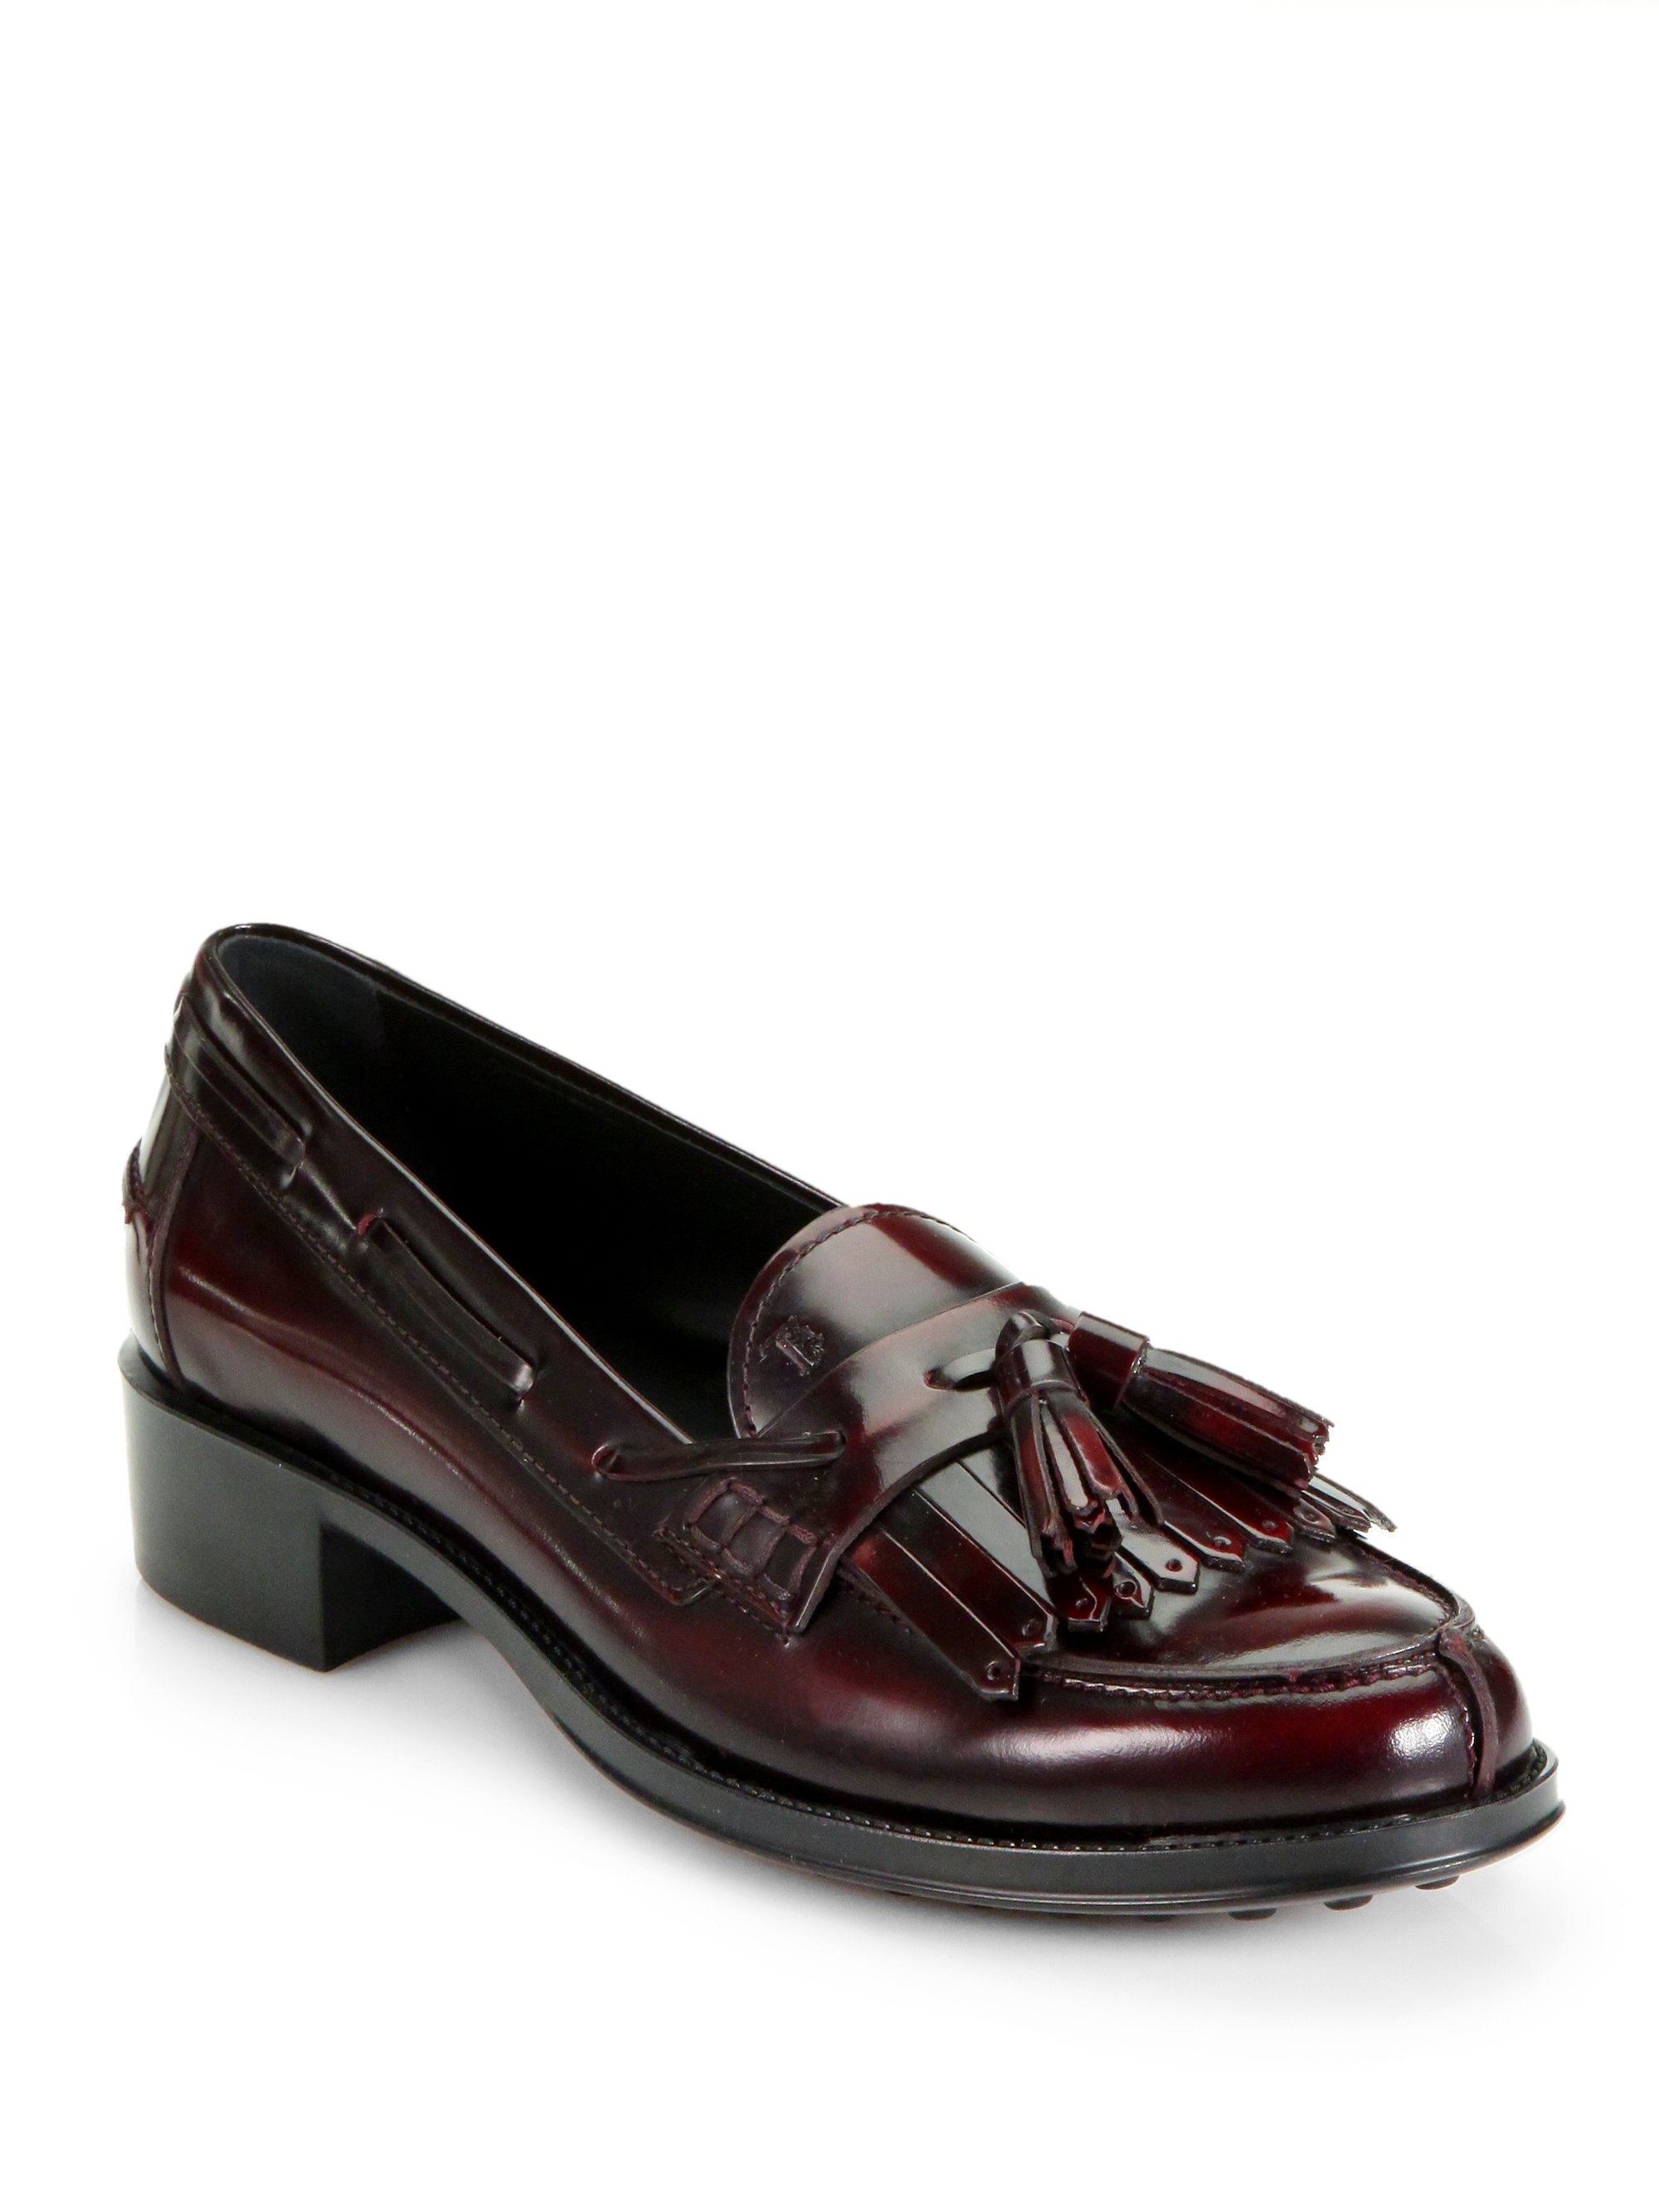 Tod's Leather Kiltie Tassel Loafer Pumps in Red - Lyst